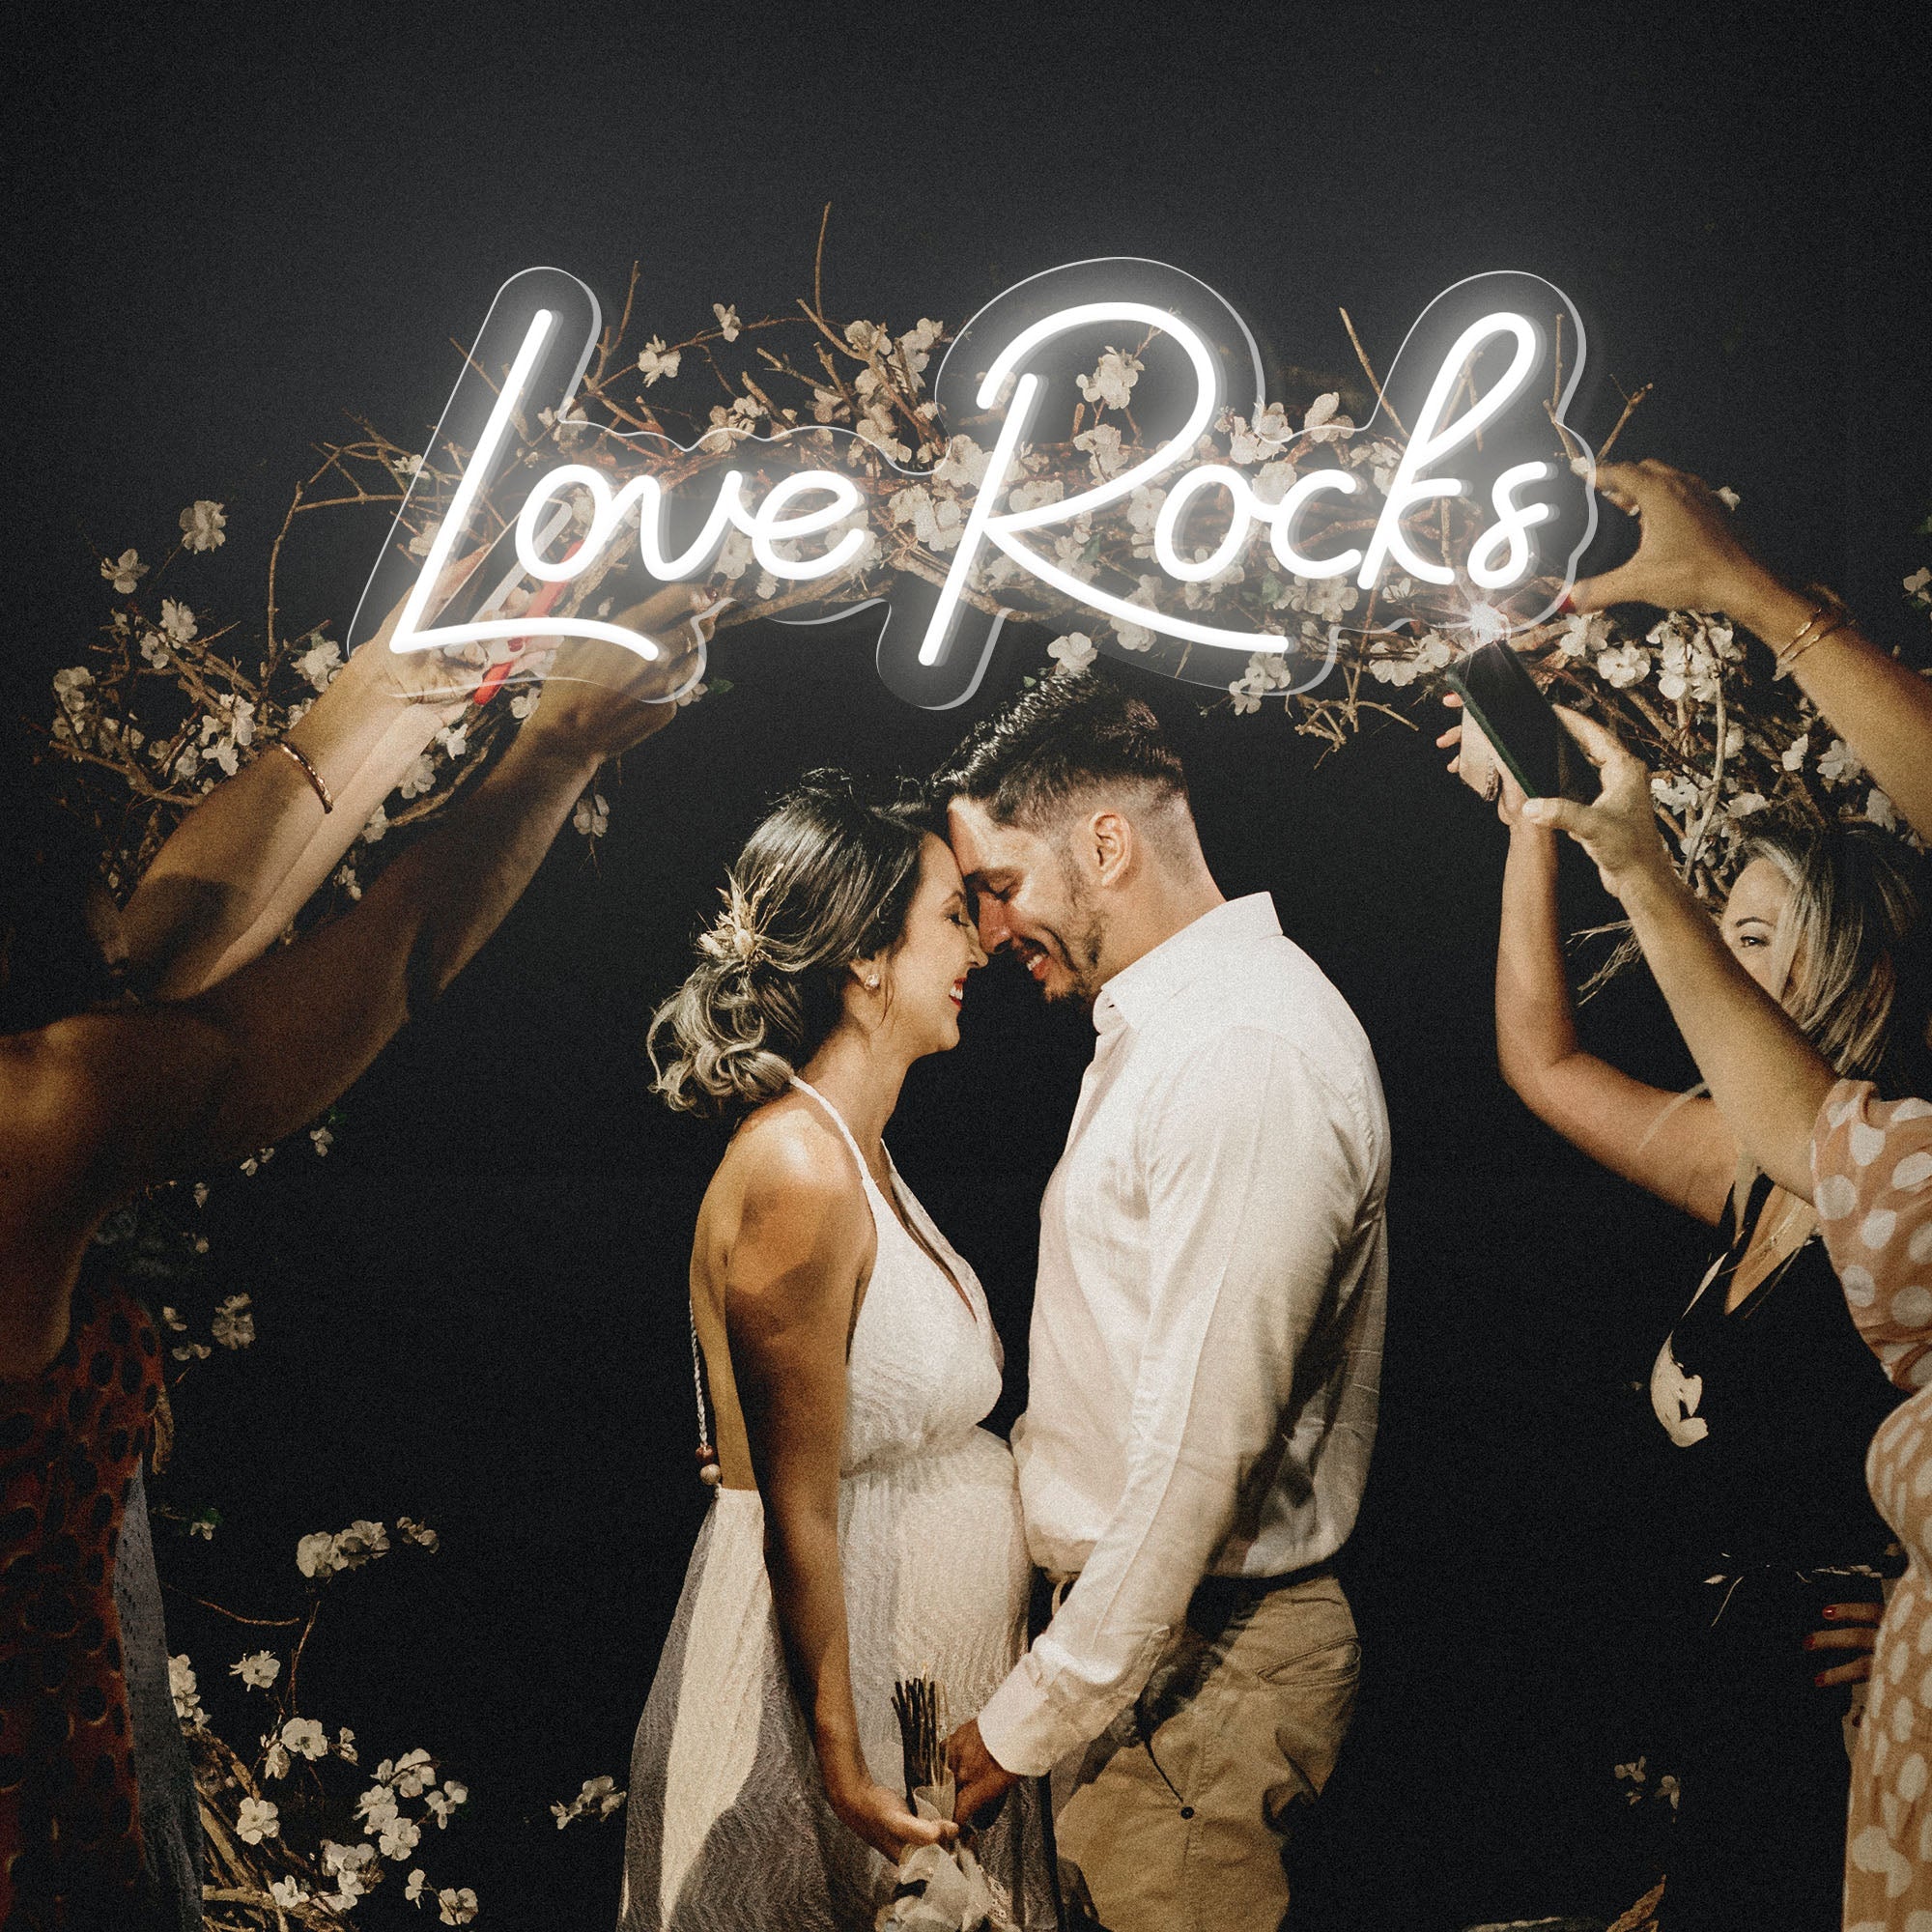 "Love Rocks" Words Neon Sign for Weddings & Proposals